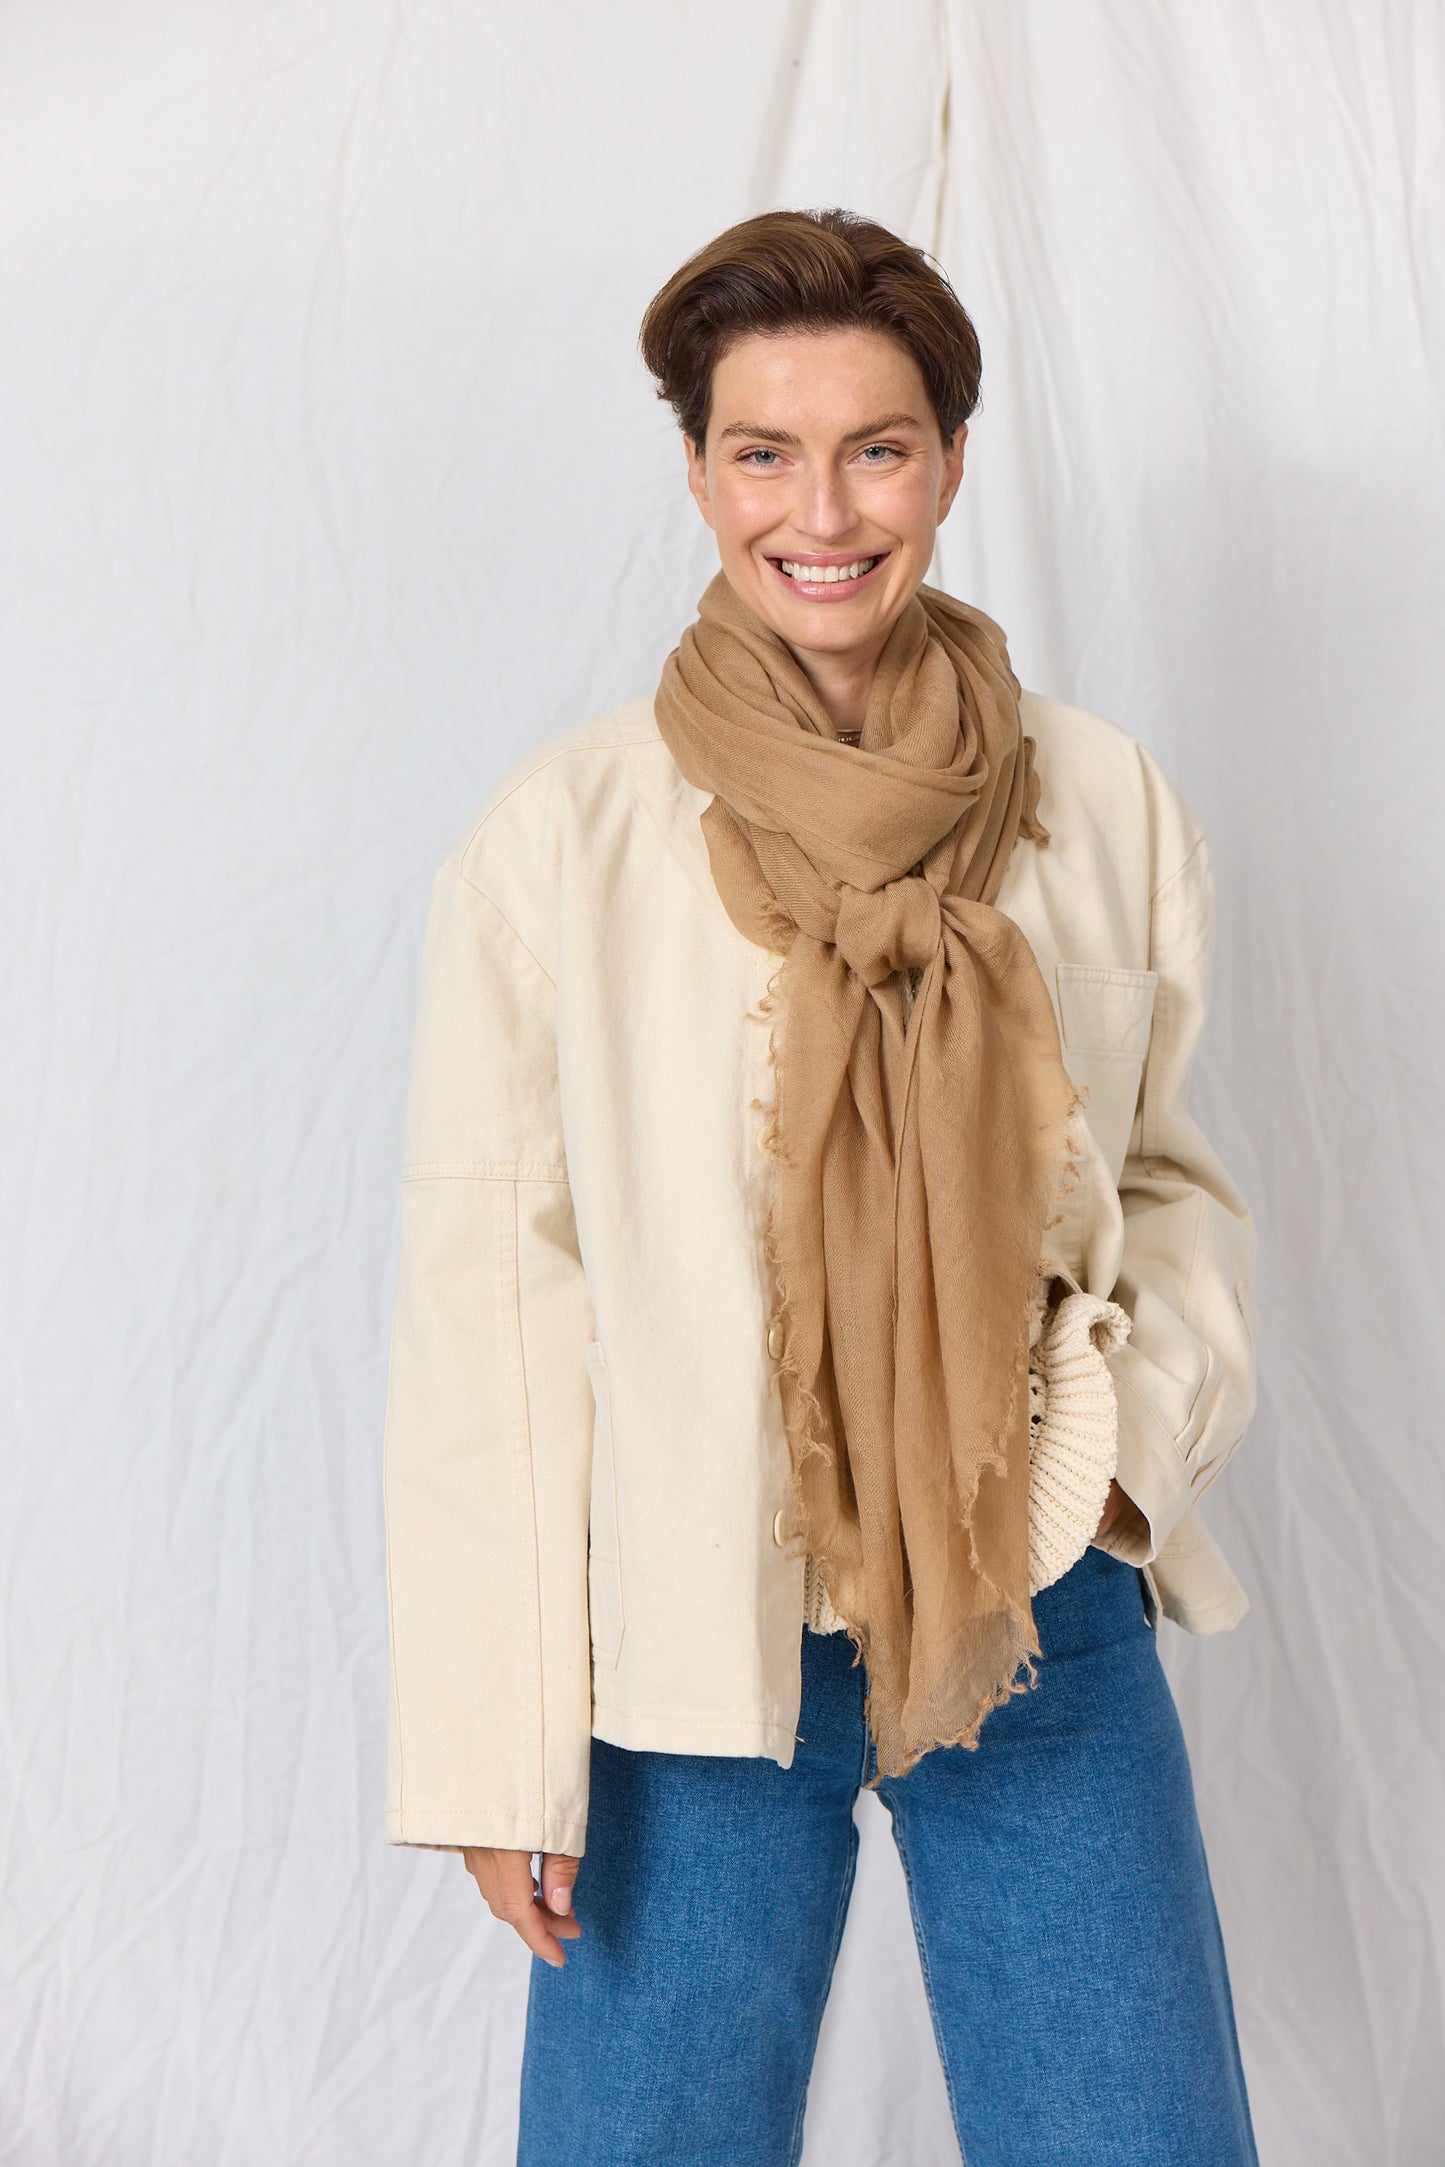 TOP OF THE POP Cashmere Scarf | Kamel